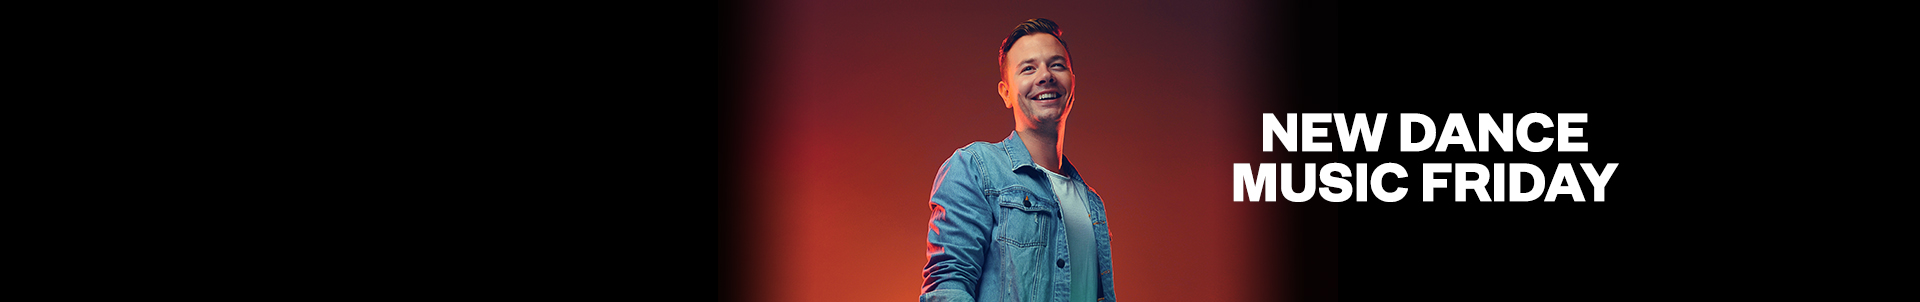 Exclusive interview: New Dance Music Friday with Sam Feldt